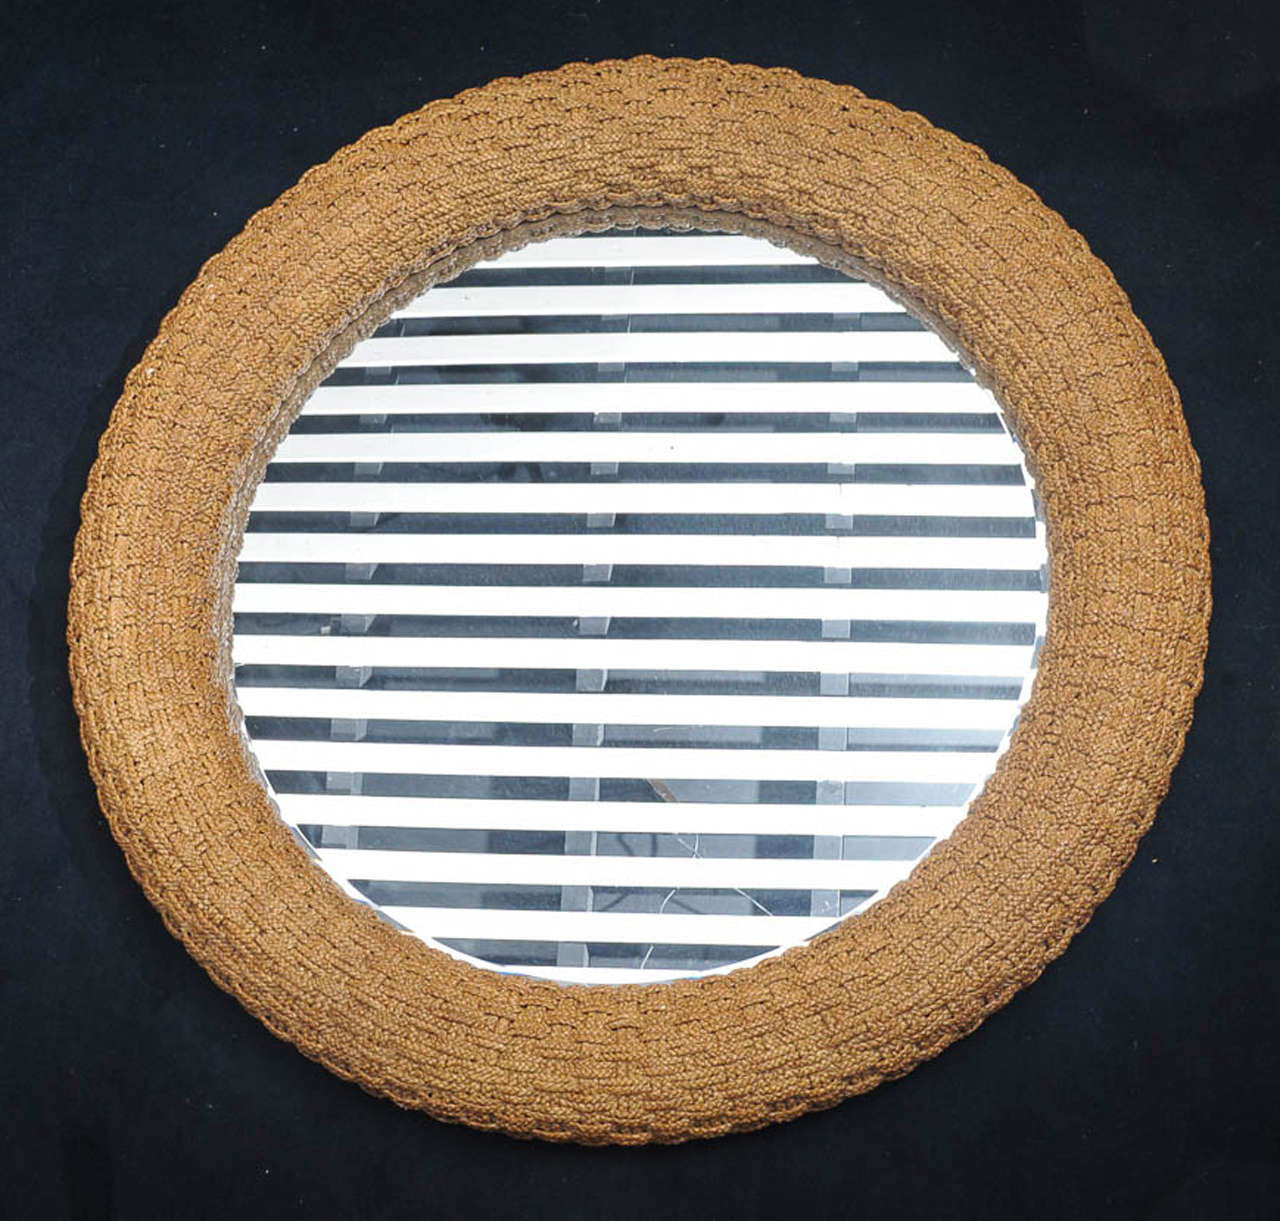 Woven nautical mirror signed 'Lexington 899-201 Nautica Mirror Made in USA.'
With its diameter of 127cm (50 inches) this late 1970s mirror is a true eyecatcher in any room. Perfect for a grand scale beach house, this great quality beveled mirror is